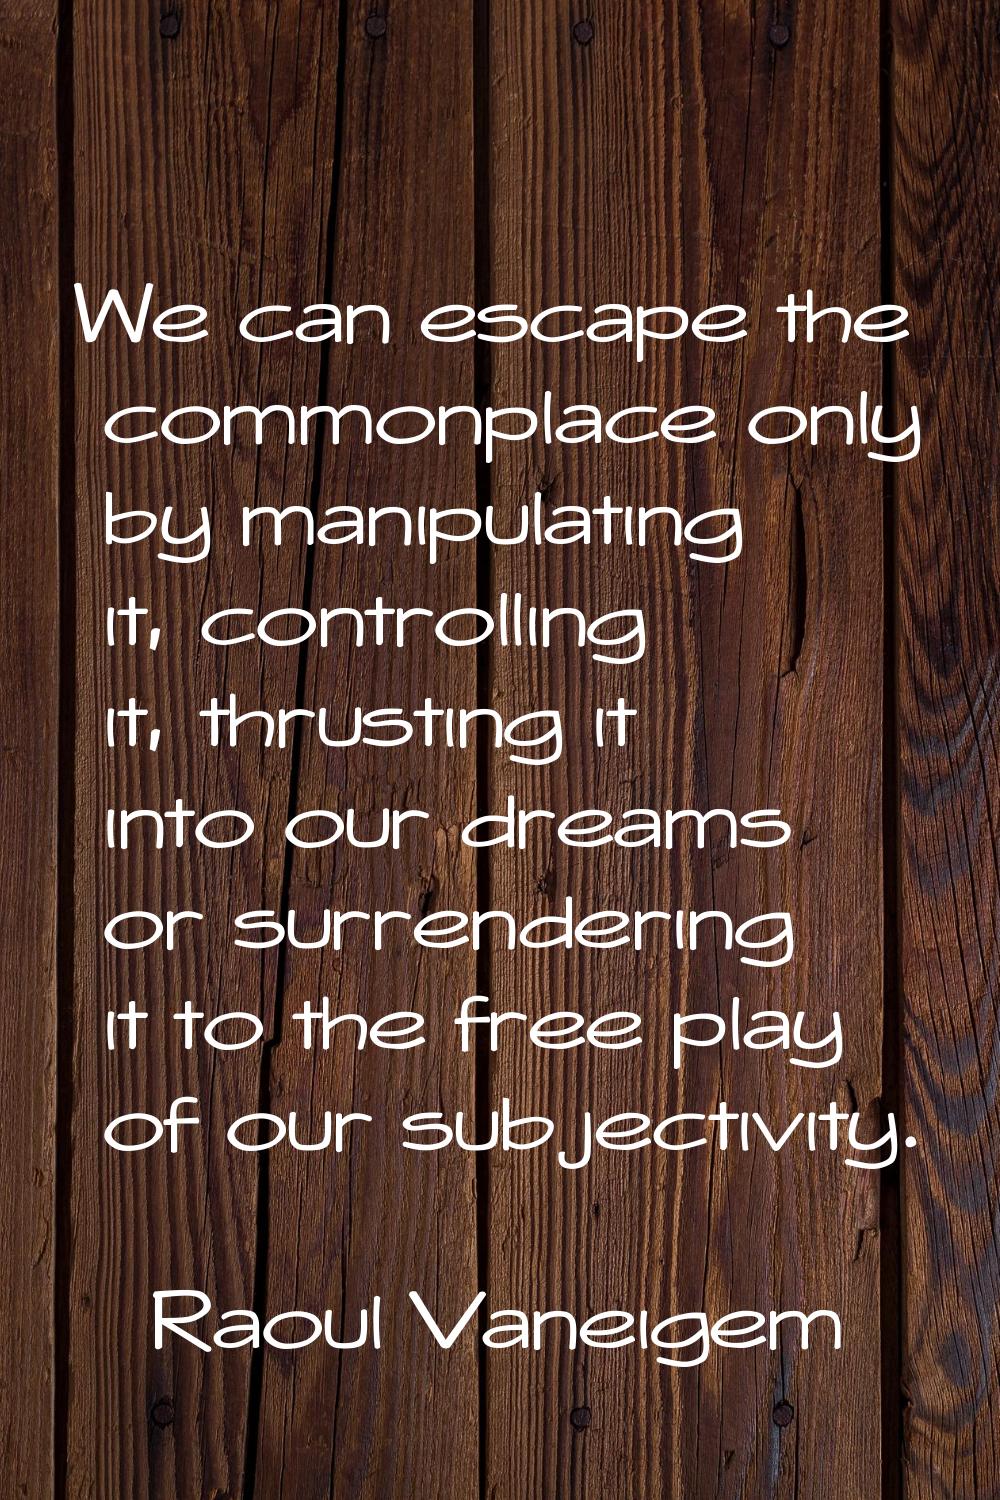 We can escape the commonplace only by manipulating it, controlling it, thrusting it into our dreams